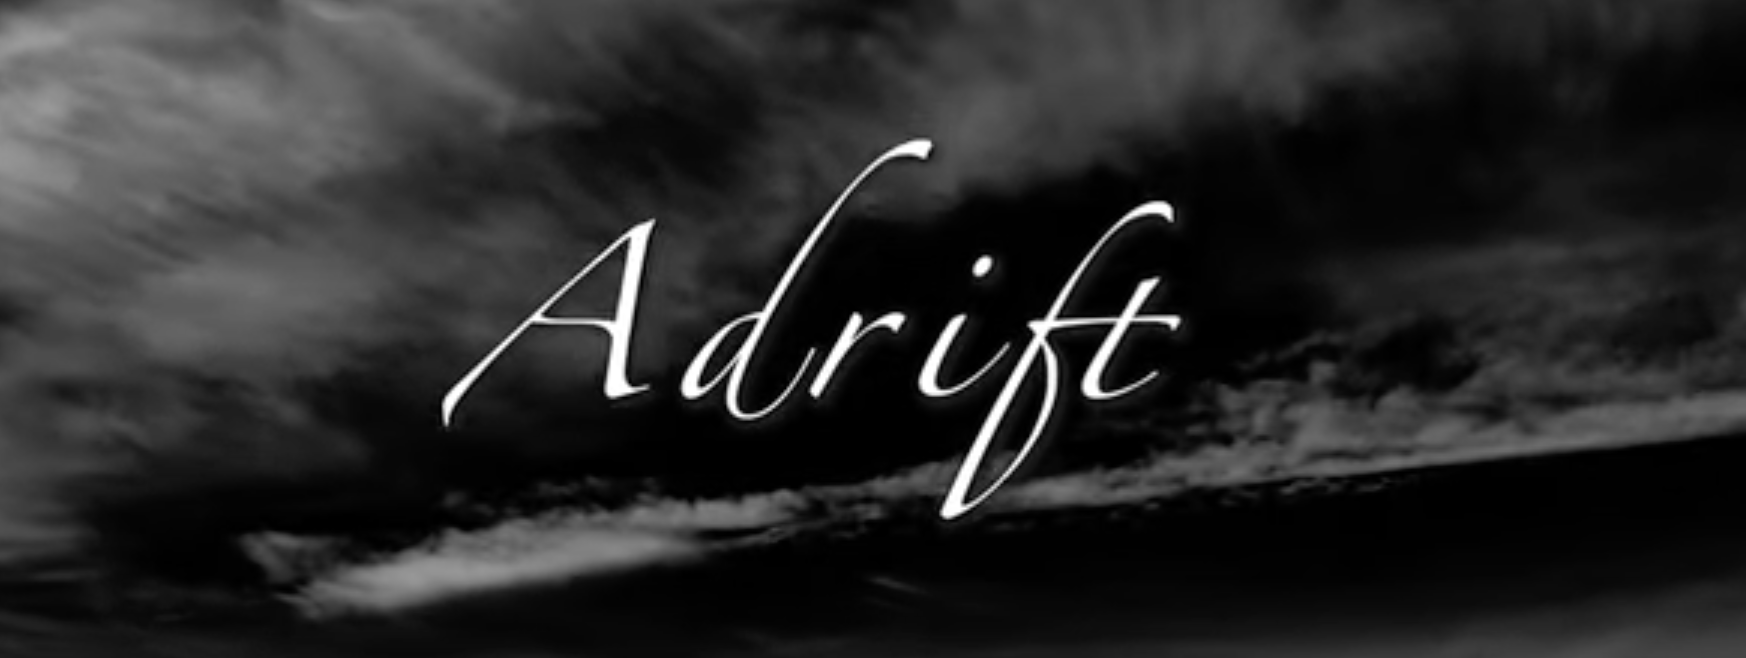 Wreck of Time - Chapter 4 - Adrift